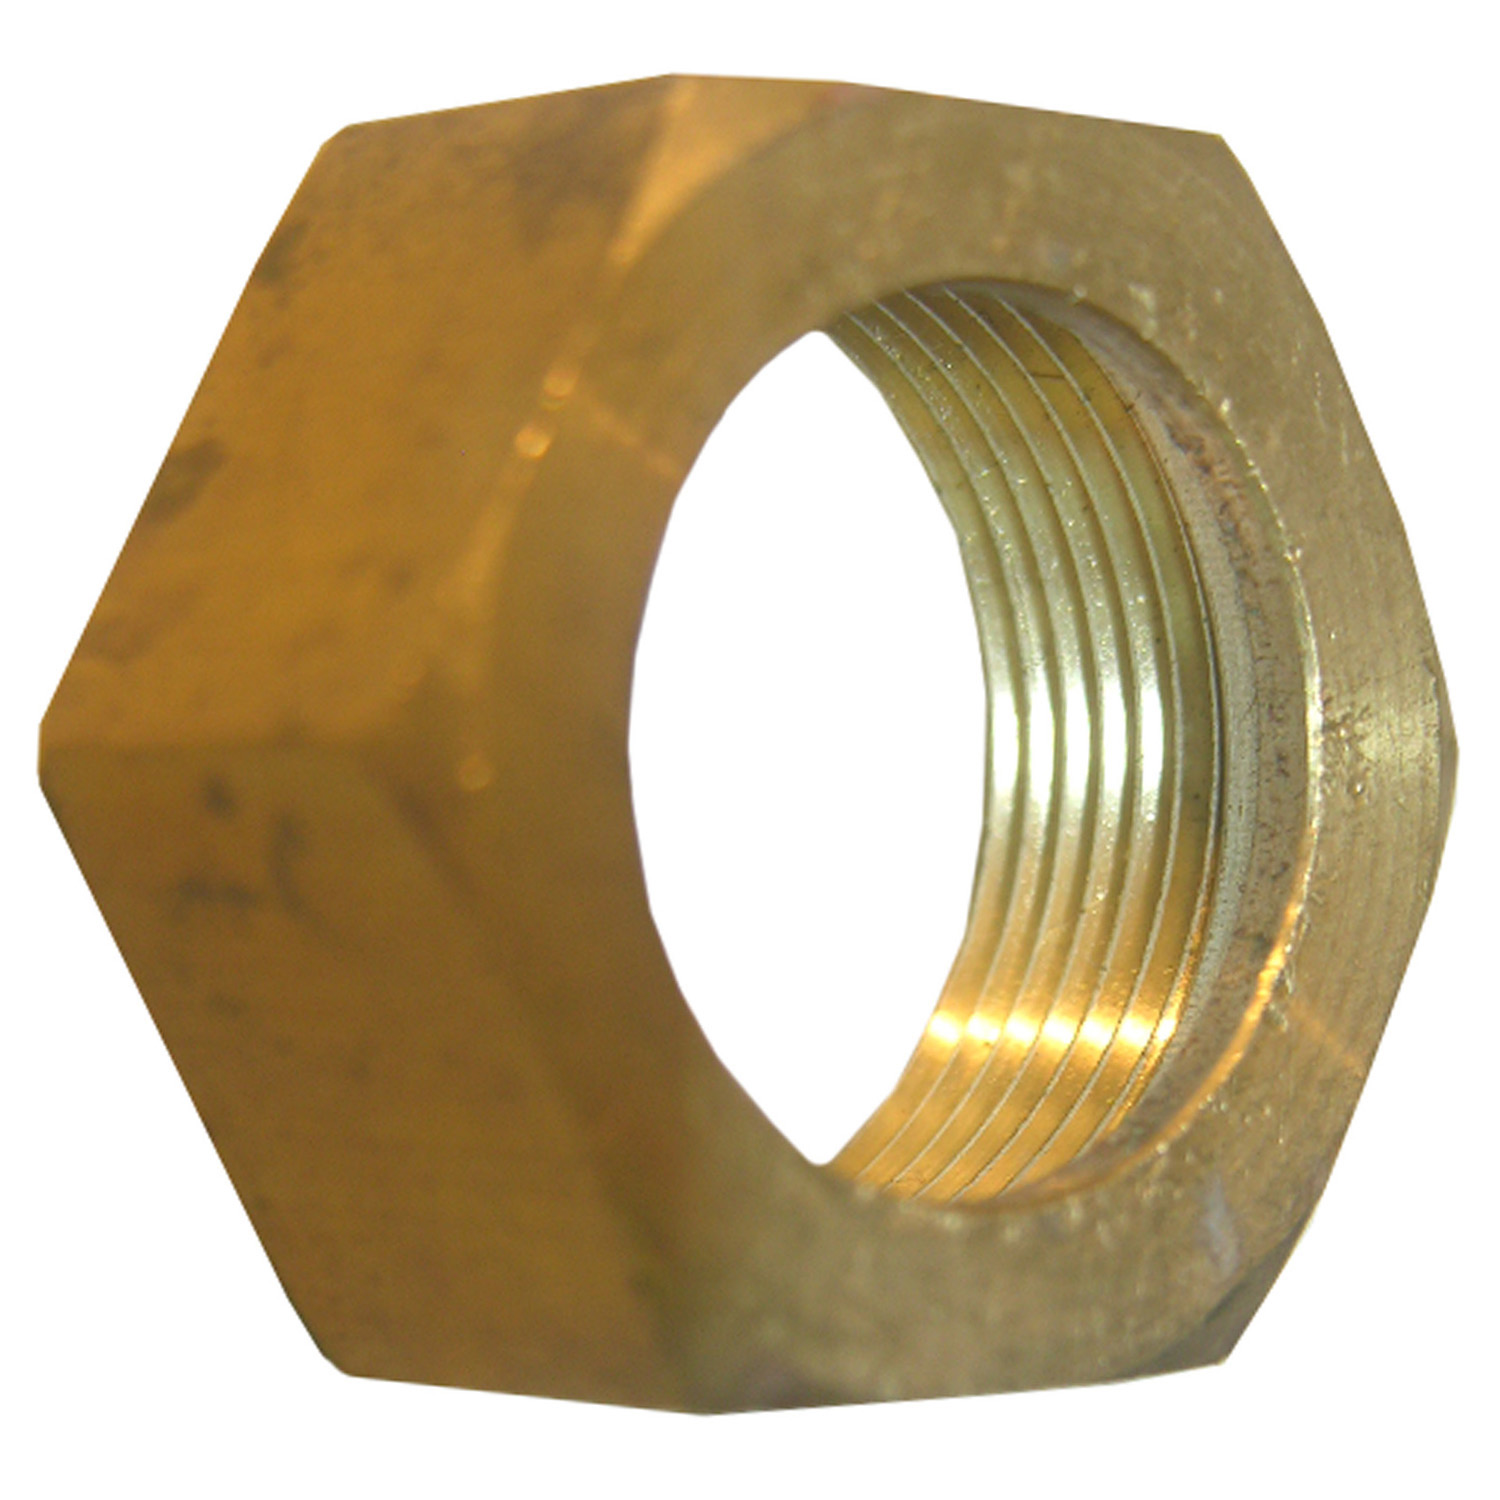 Lasco 17-6137 Nut and Sleeve, 3/8 in, Compression, Brass